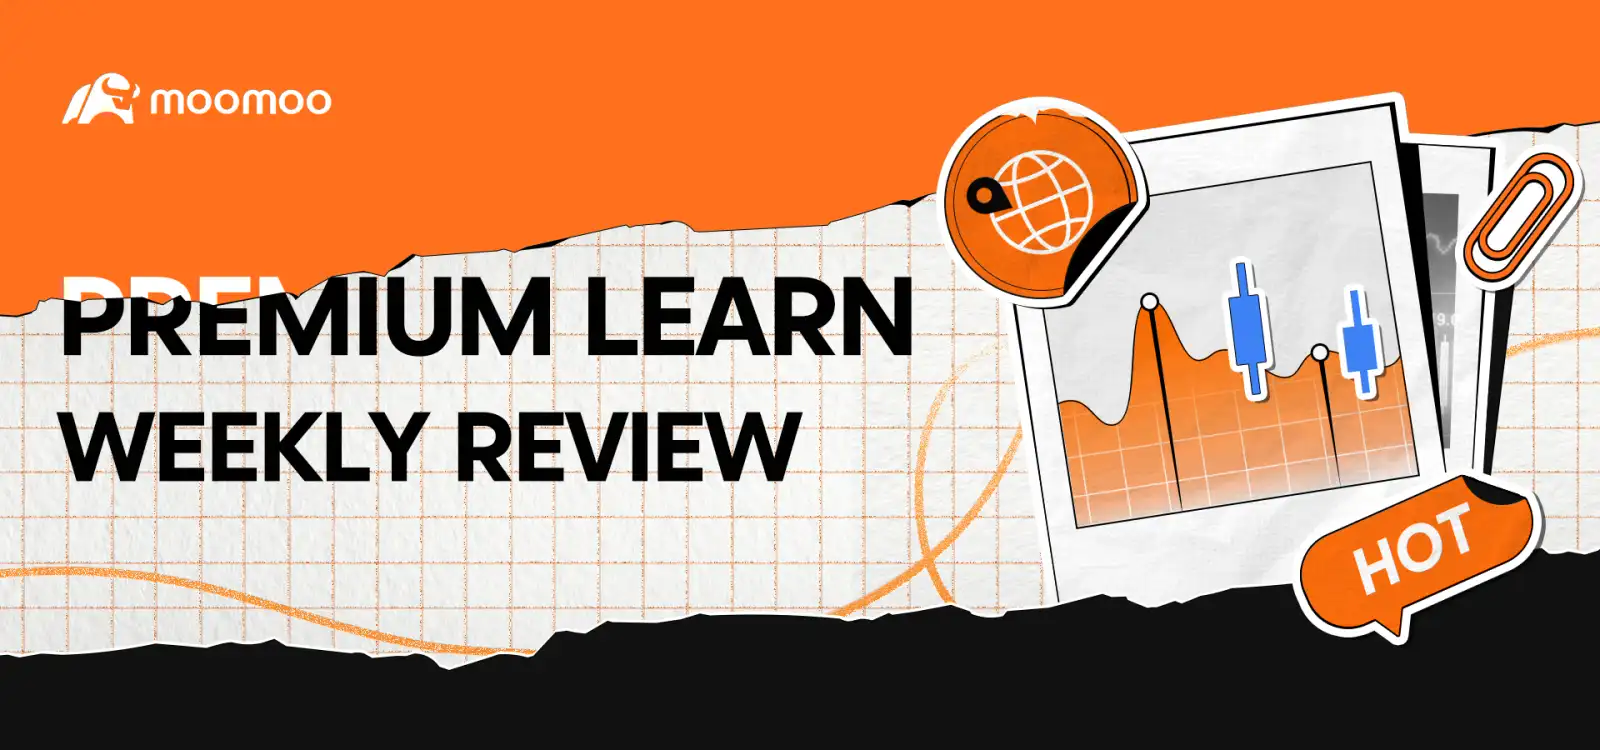 Premium Learn weekly review: GDP Grows Faster Than Expected, Tech Earnings Fail to Boost Market Sentiment?